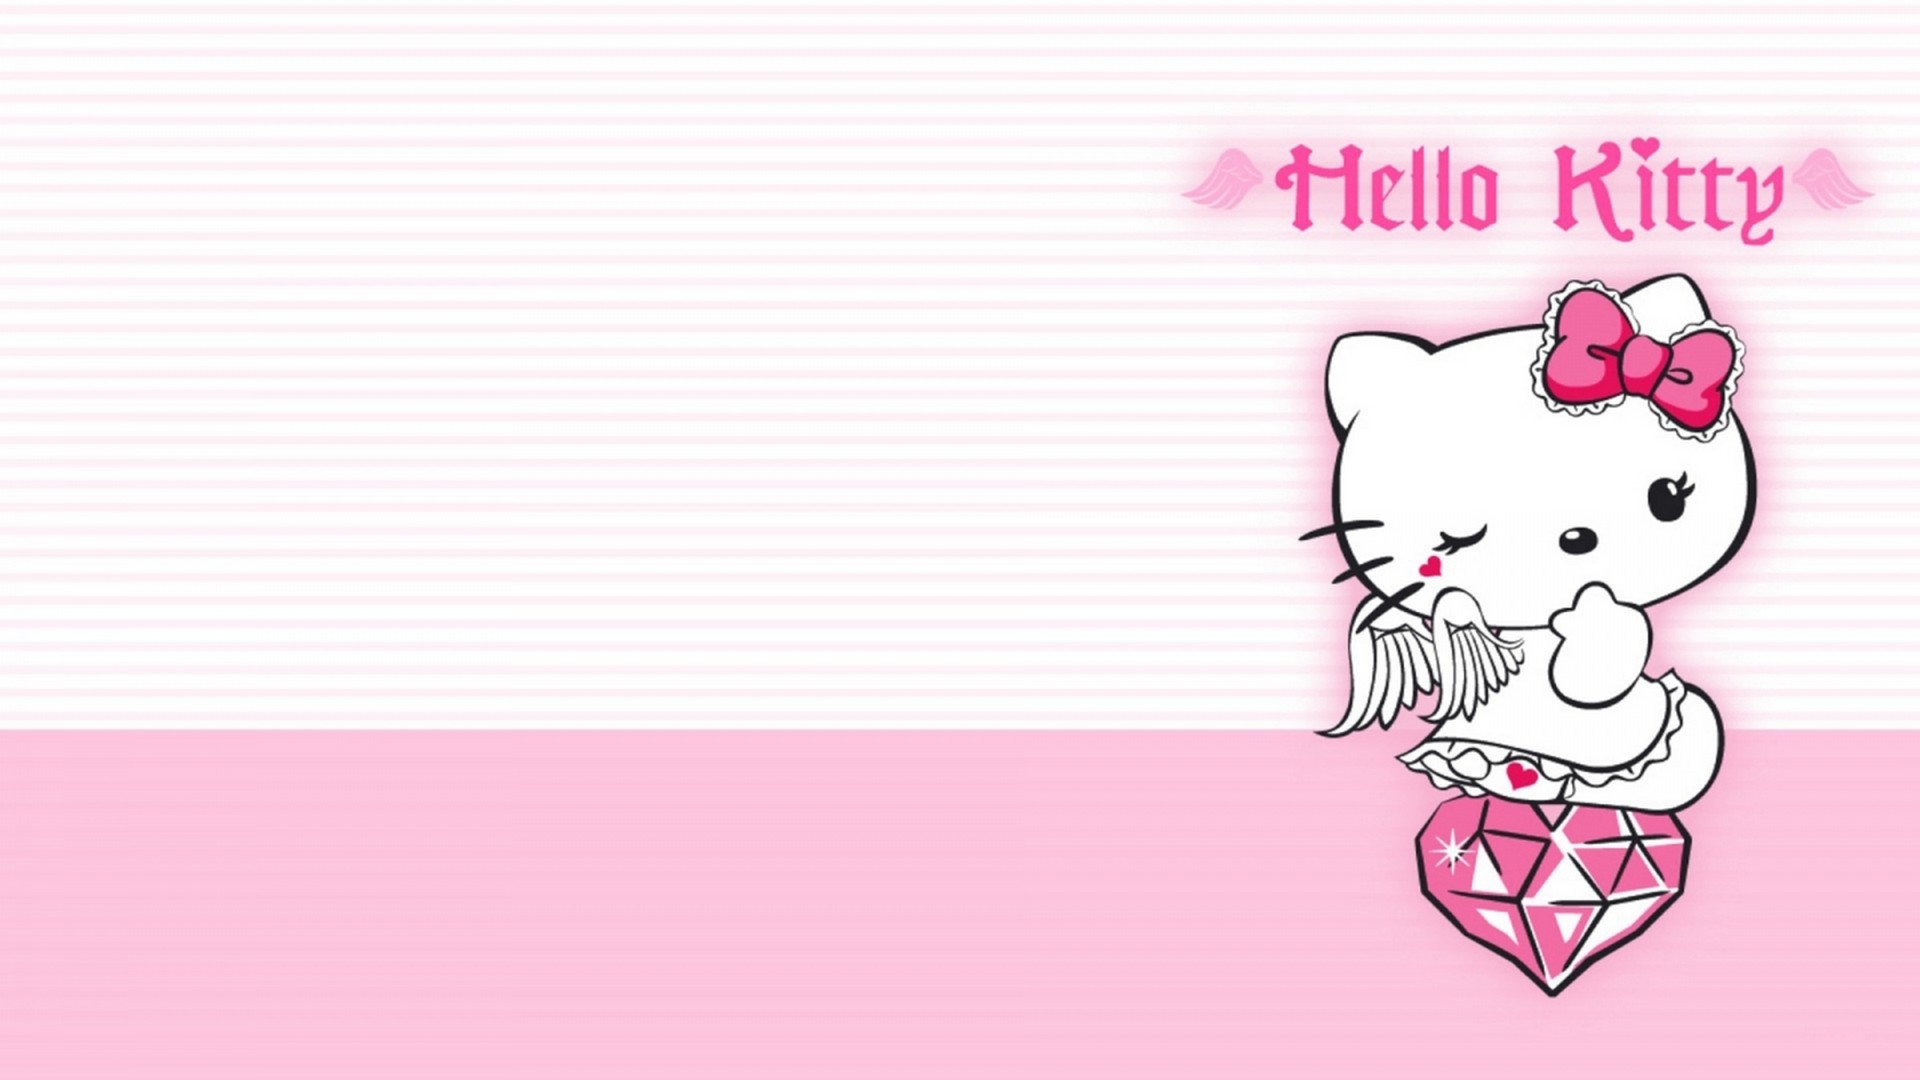 Wallpaper HD Hello Kitty Characters With Resolution 1920X1080 pixel. You can make this wallpaper for your Desktop Computer Backgrounds, Mac Wallpapers, Android Lock screen or iPhone Screensavers